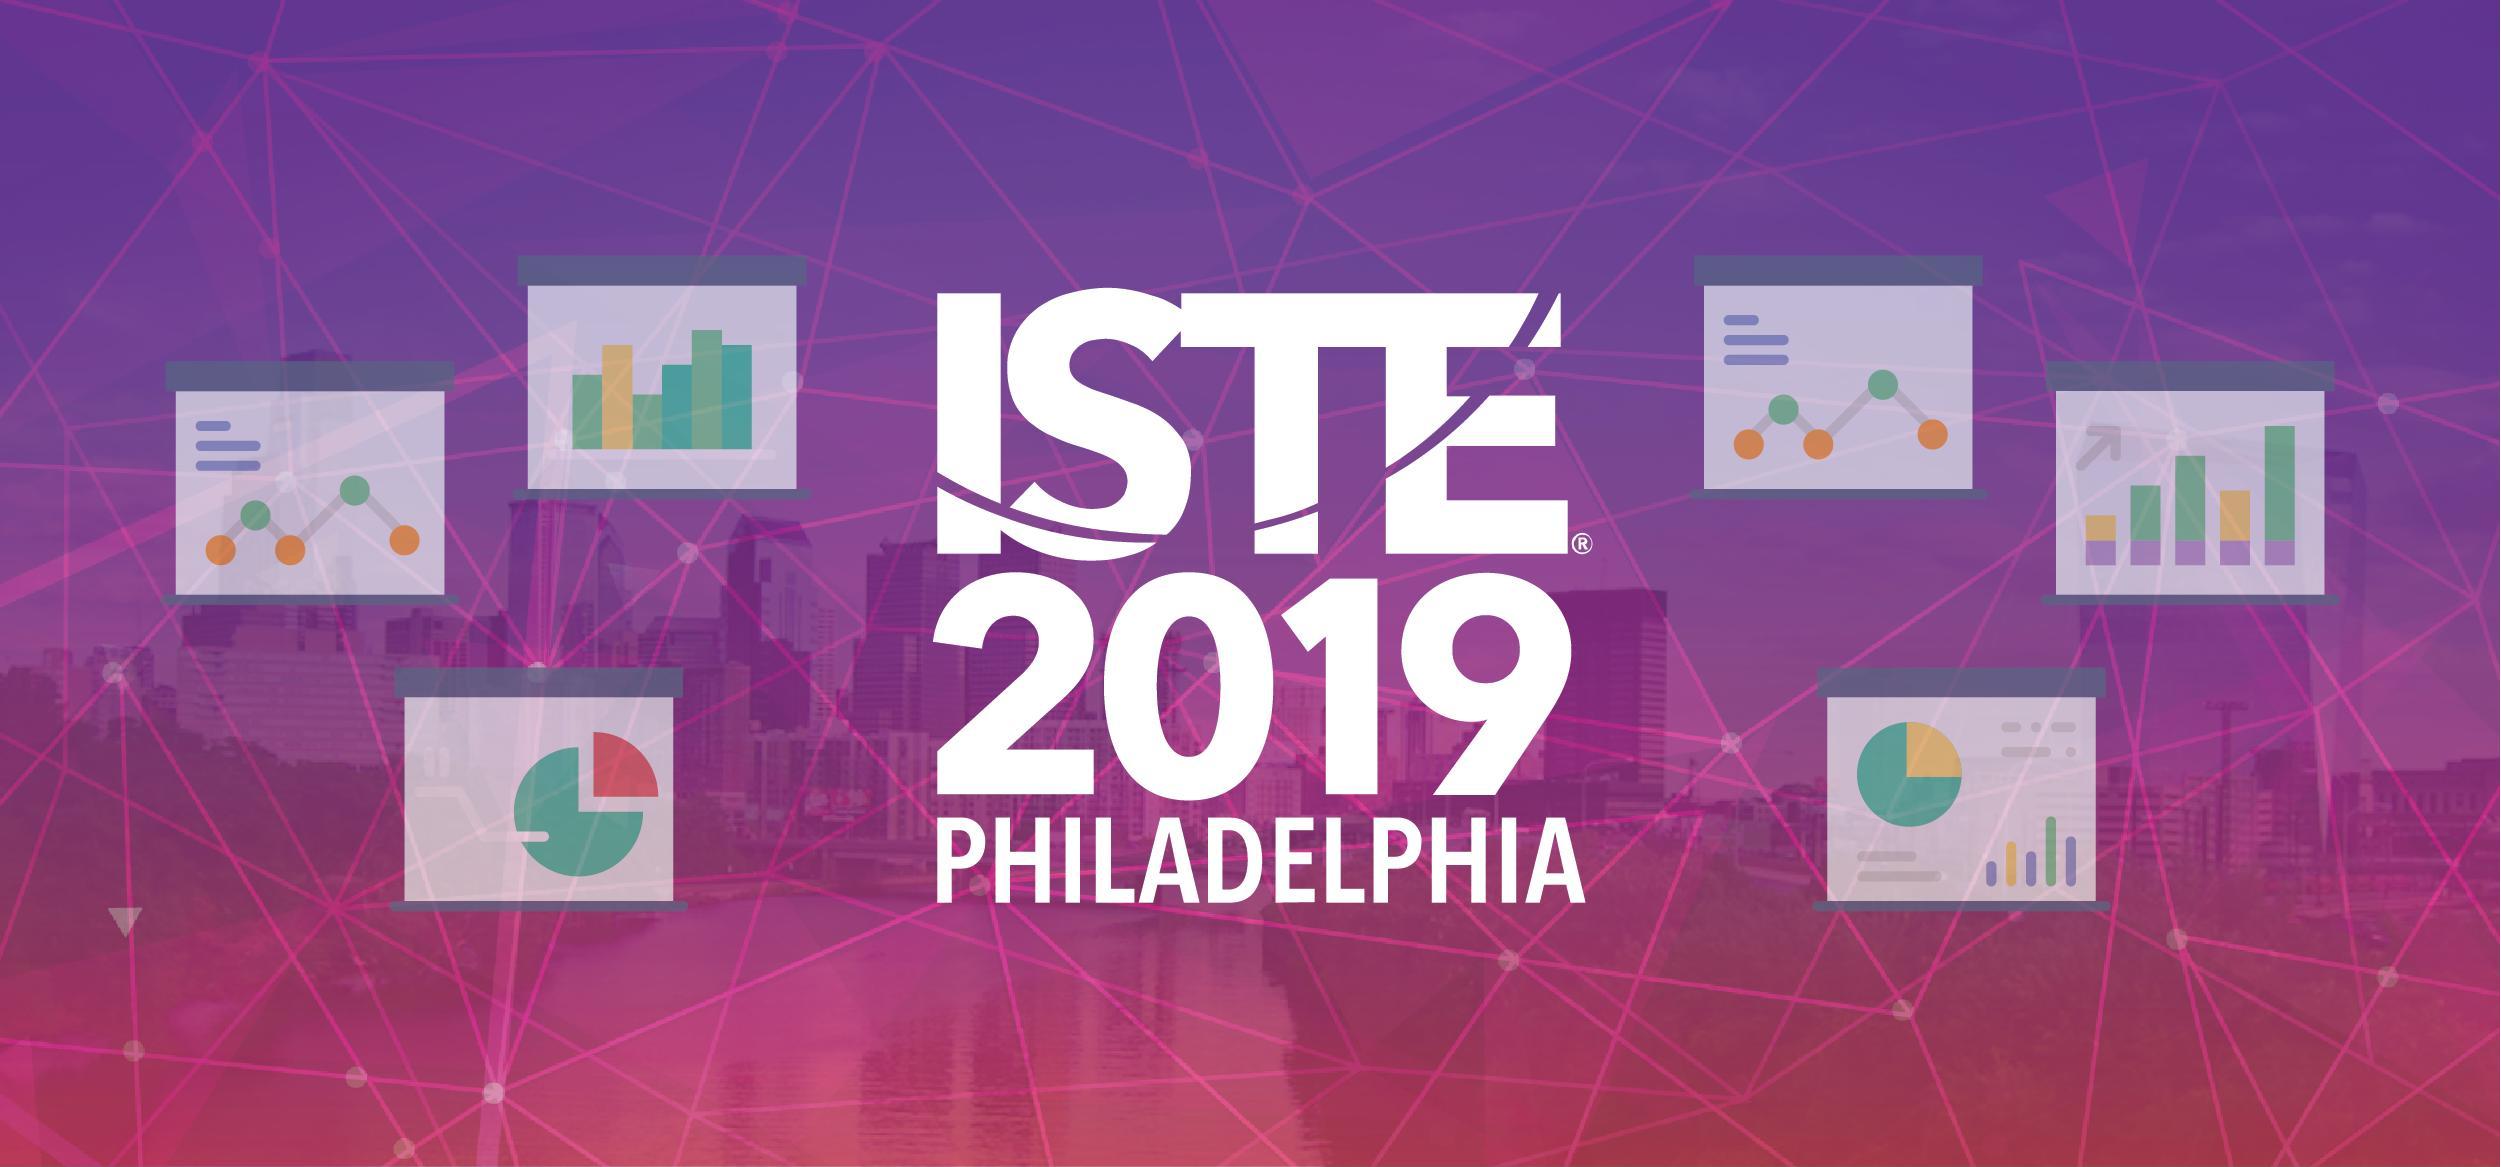 Iste Logo - Hapara's ISTE 2019 sessions not to miss - Hapara